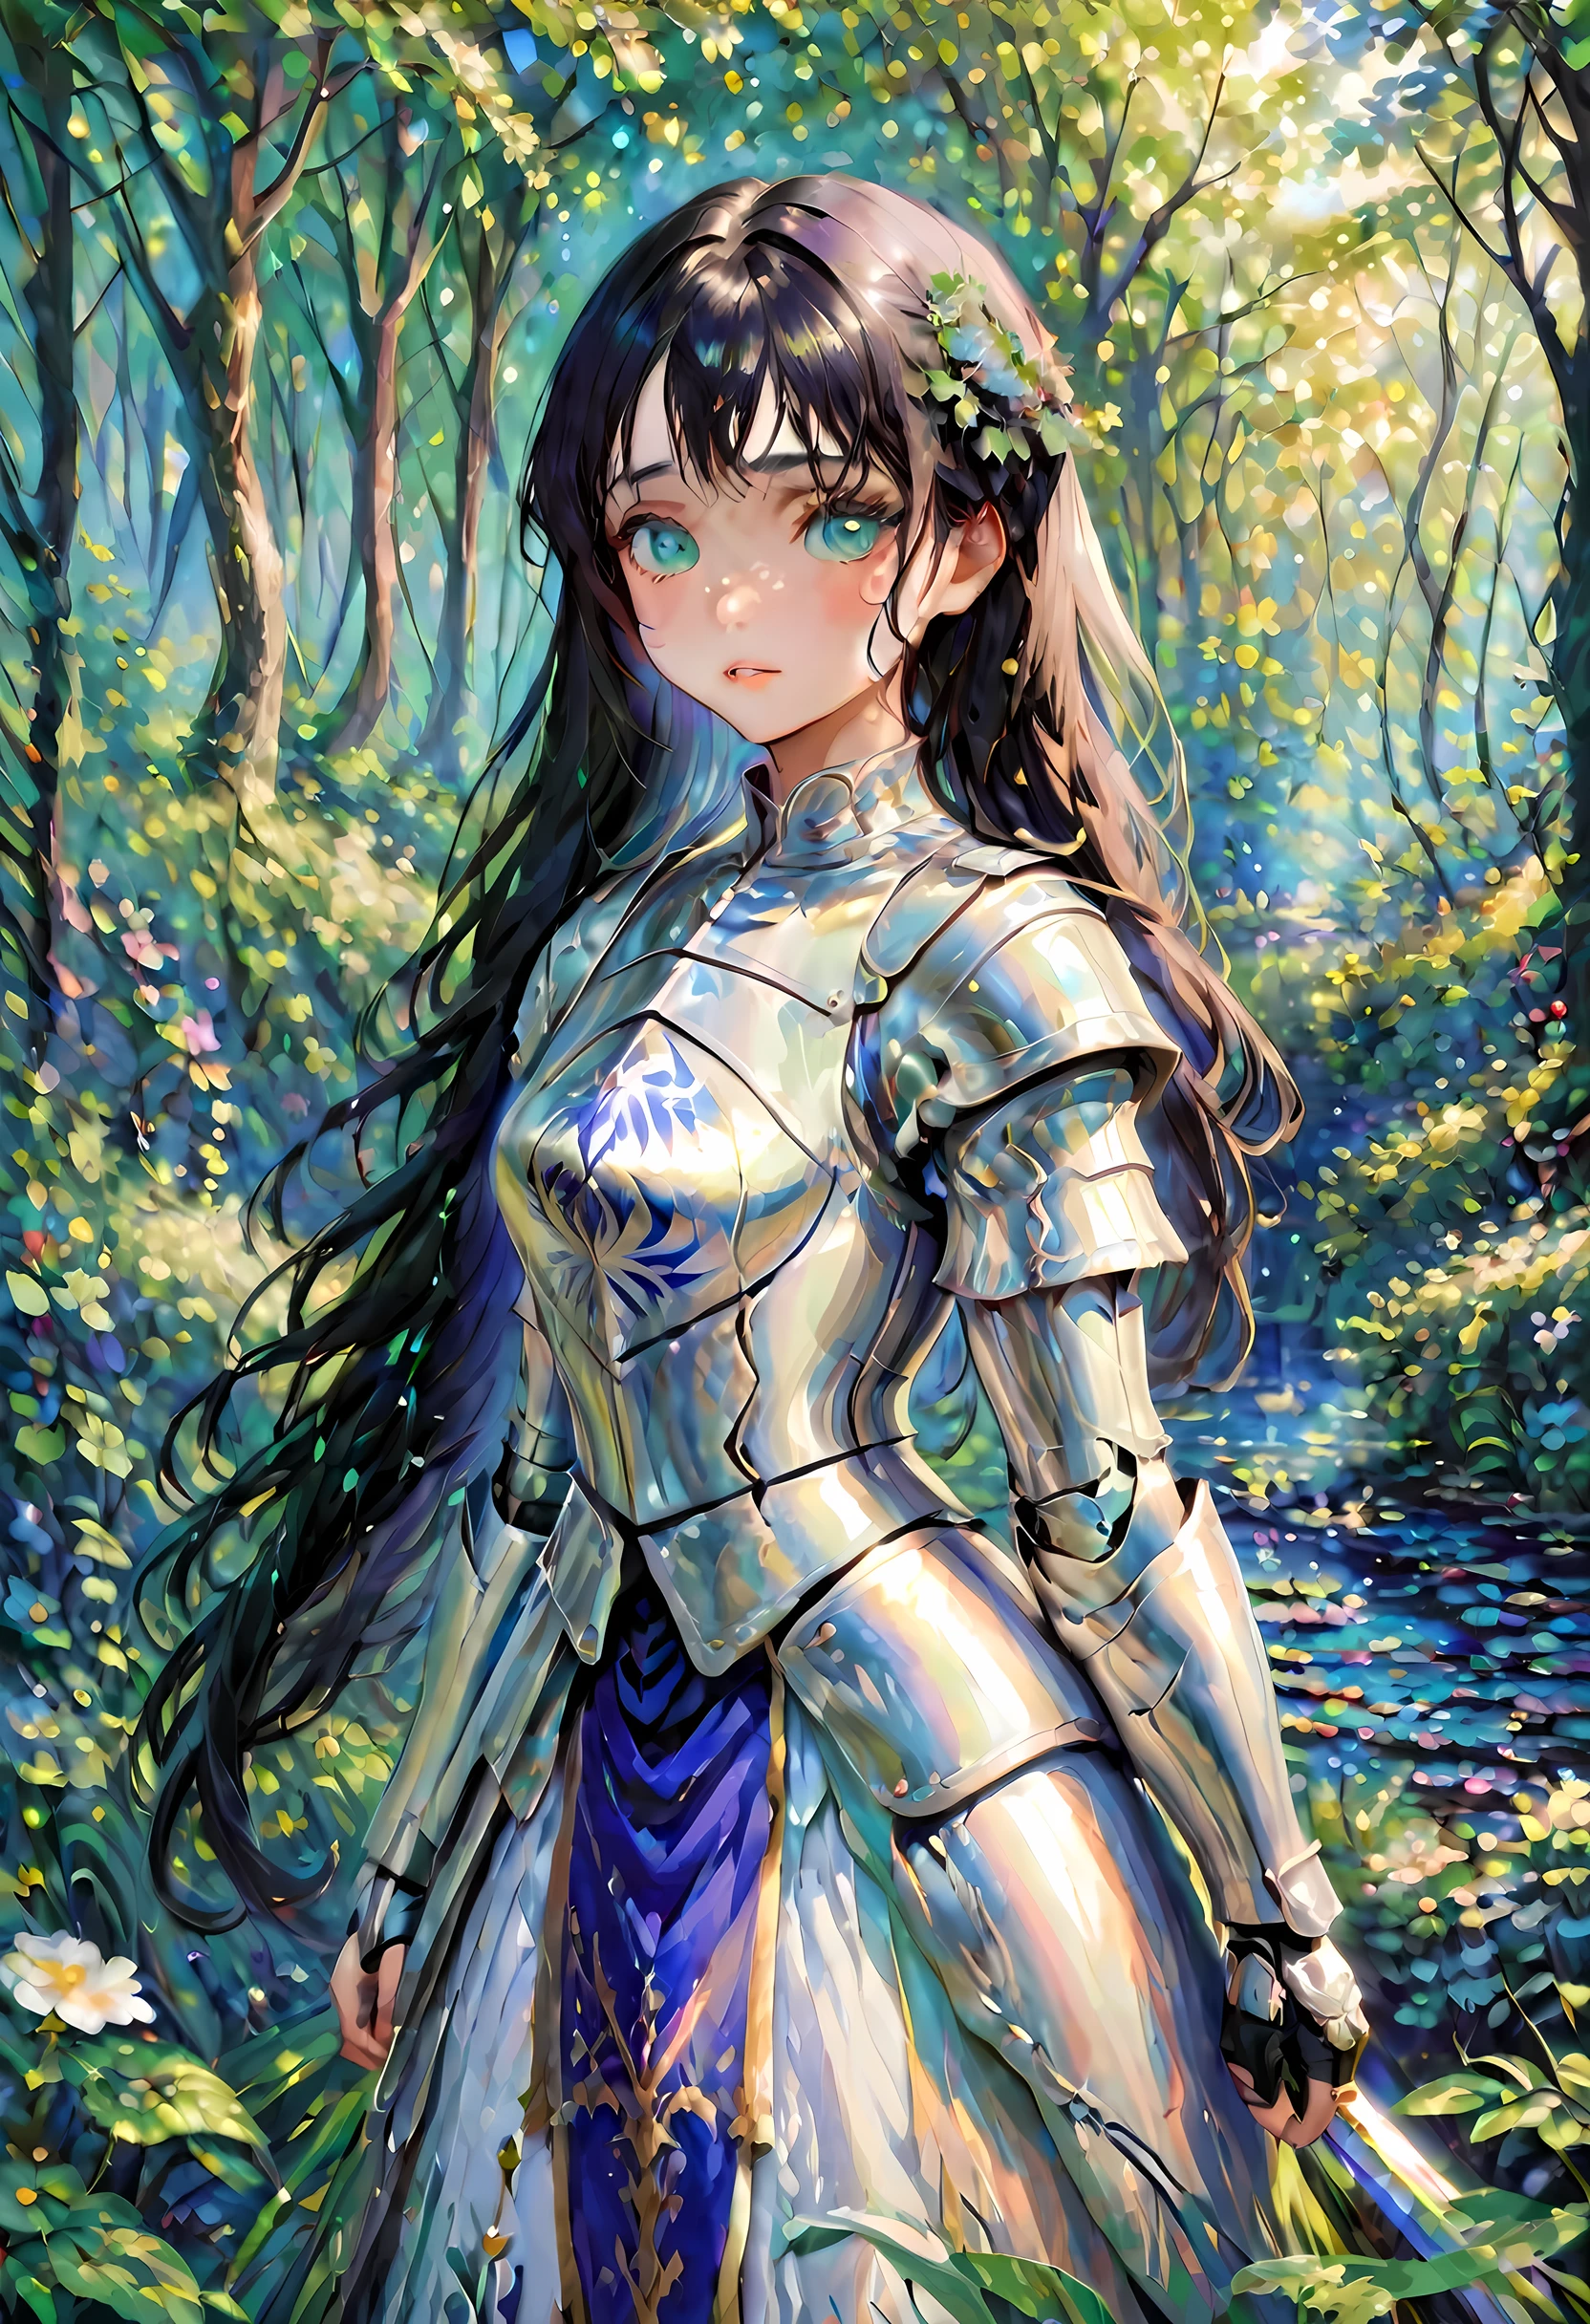 (Claude Monet Style:1.5) Claude_Monet style painting, a picture of woman paladin of nature protecting the forest, a woman knight, black hair, long hair, full body (best details, Masterpiece, best quality :1.5), ultra detailed face (best details, Masterpiece, best quality :1.5), ultra feminine (best details, Masterpiece, best quality :1.5), black hair, long hair, braided hair, pale skin, (deep blue: 1.2) eyes, intense eyes, wearying heavy armor, white armor (best details, Masterpiece, best quality :1.5), green cloak, armed with a sword, glowing sword GlowingRunes_green, fantasy forest background, D&D art, RPG art, magical atmosphere magic-fantasy-forest, ultra best realistic, best details, best quality, 16k, [ultra detailed], masterpiece, best quality, (extremely detailed), ultra wide shot, photorealism, depth of field, hyper realistic painting, ArmoredDress